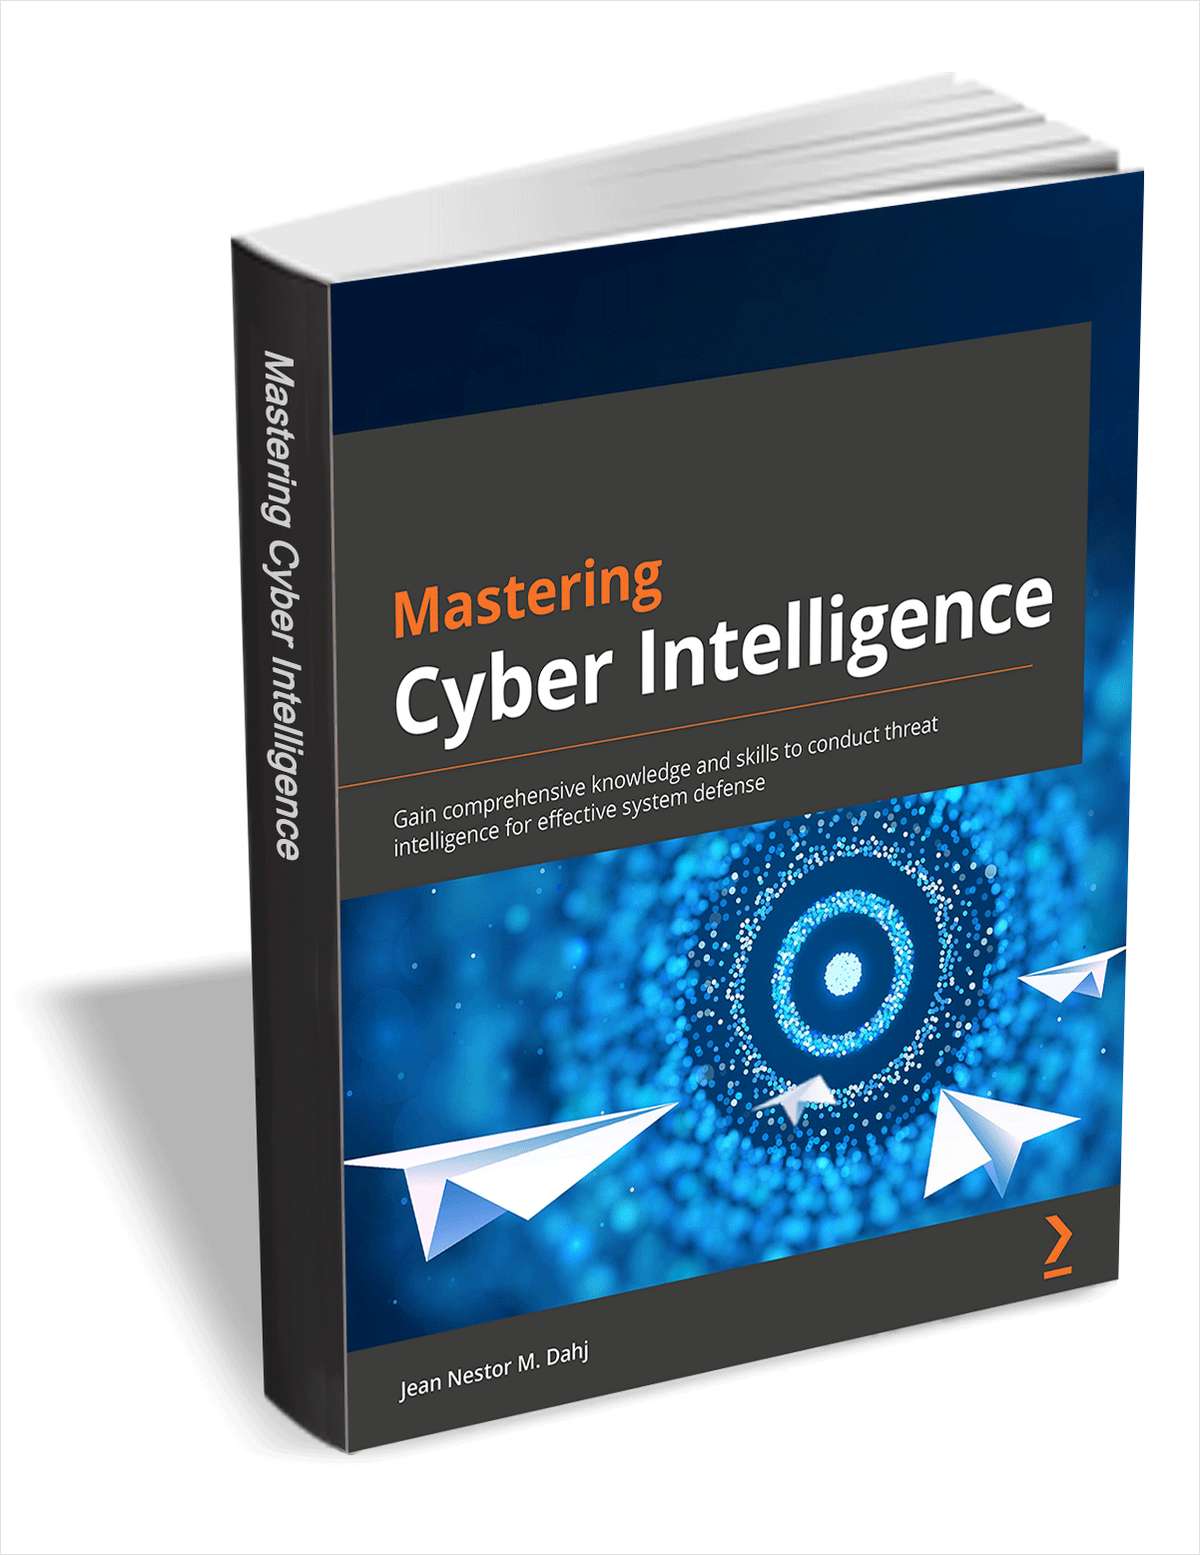 Mastering Cyber Intelligence ($19.99 Value) FREE for a Limited Time